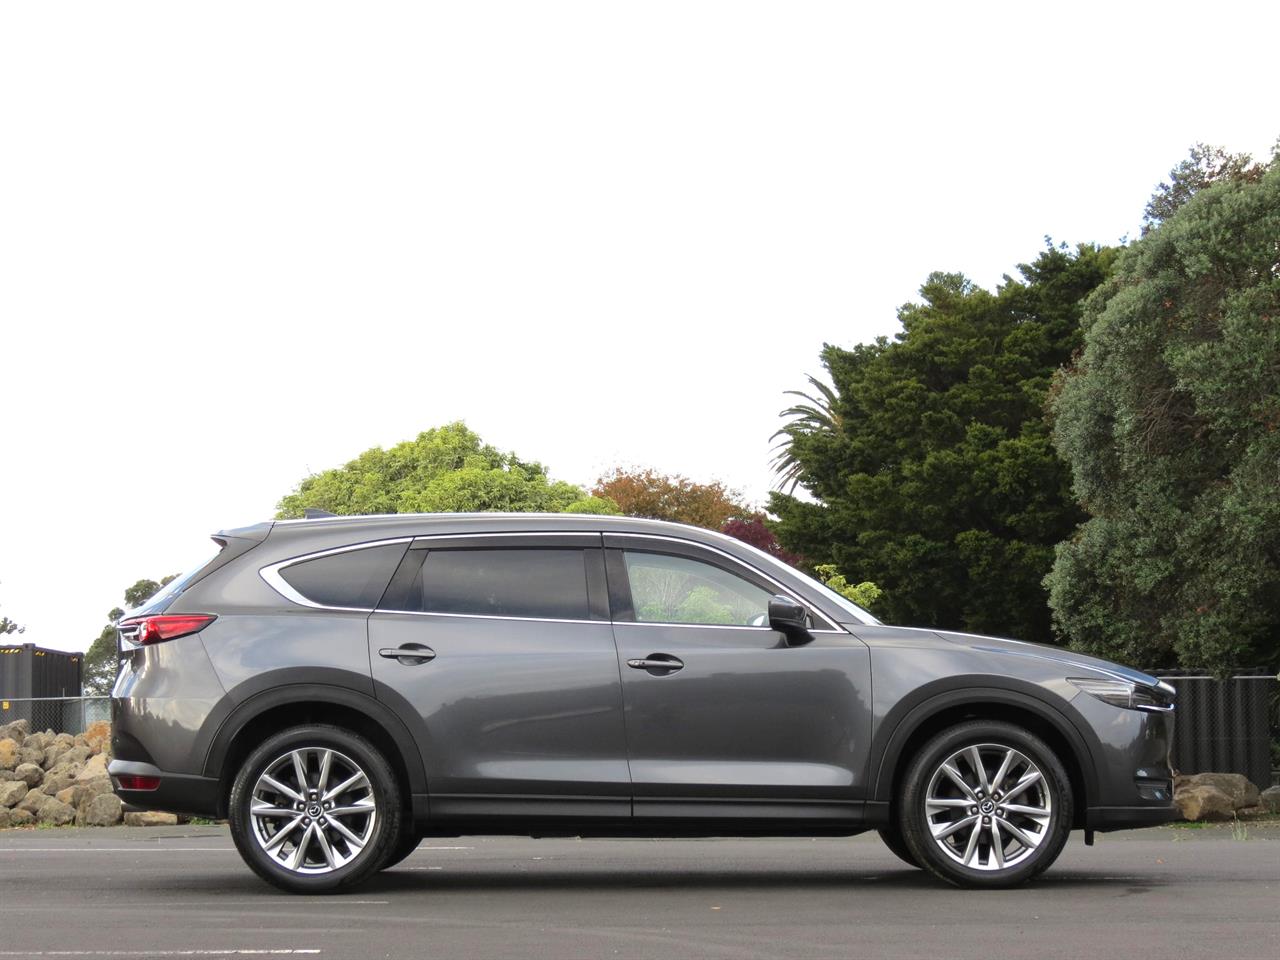 2018 Mazda CX-8 only $105 weekly